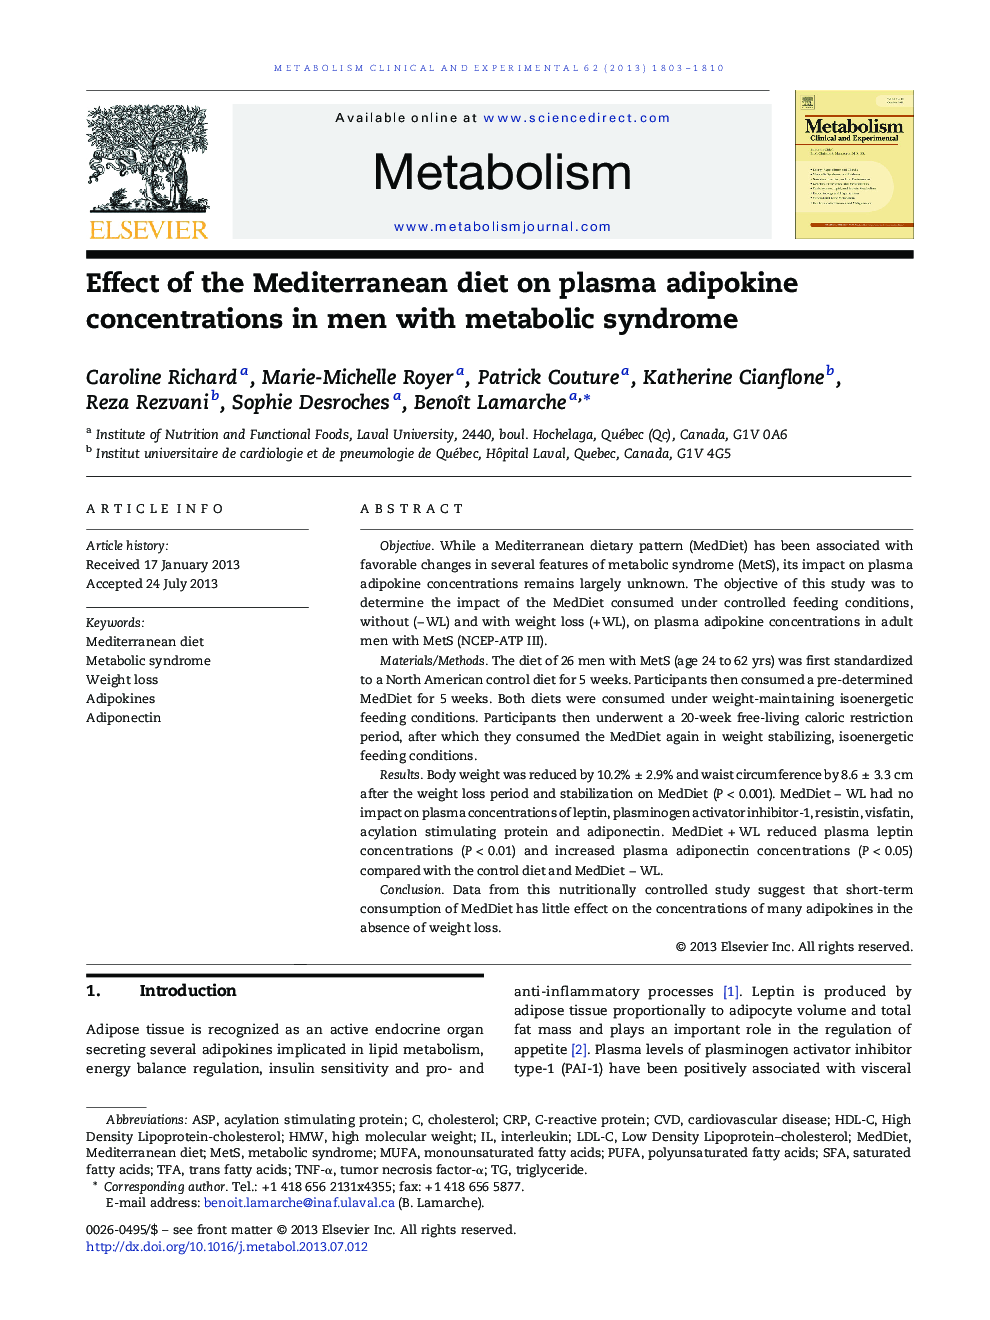 Effect of the Mediterranean diet on plasma adipokine concentrations in men with metabolic syndrome